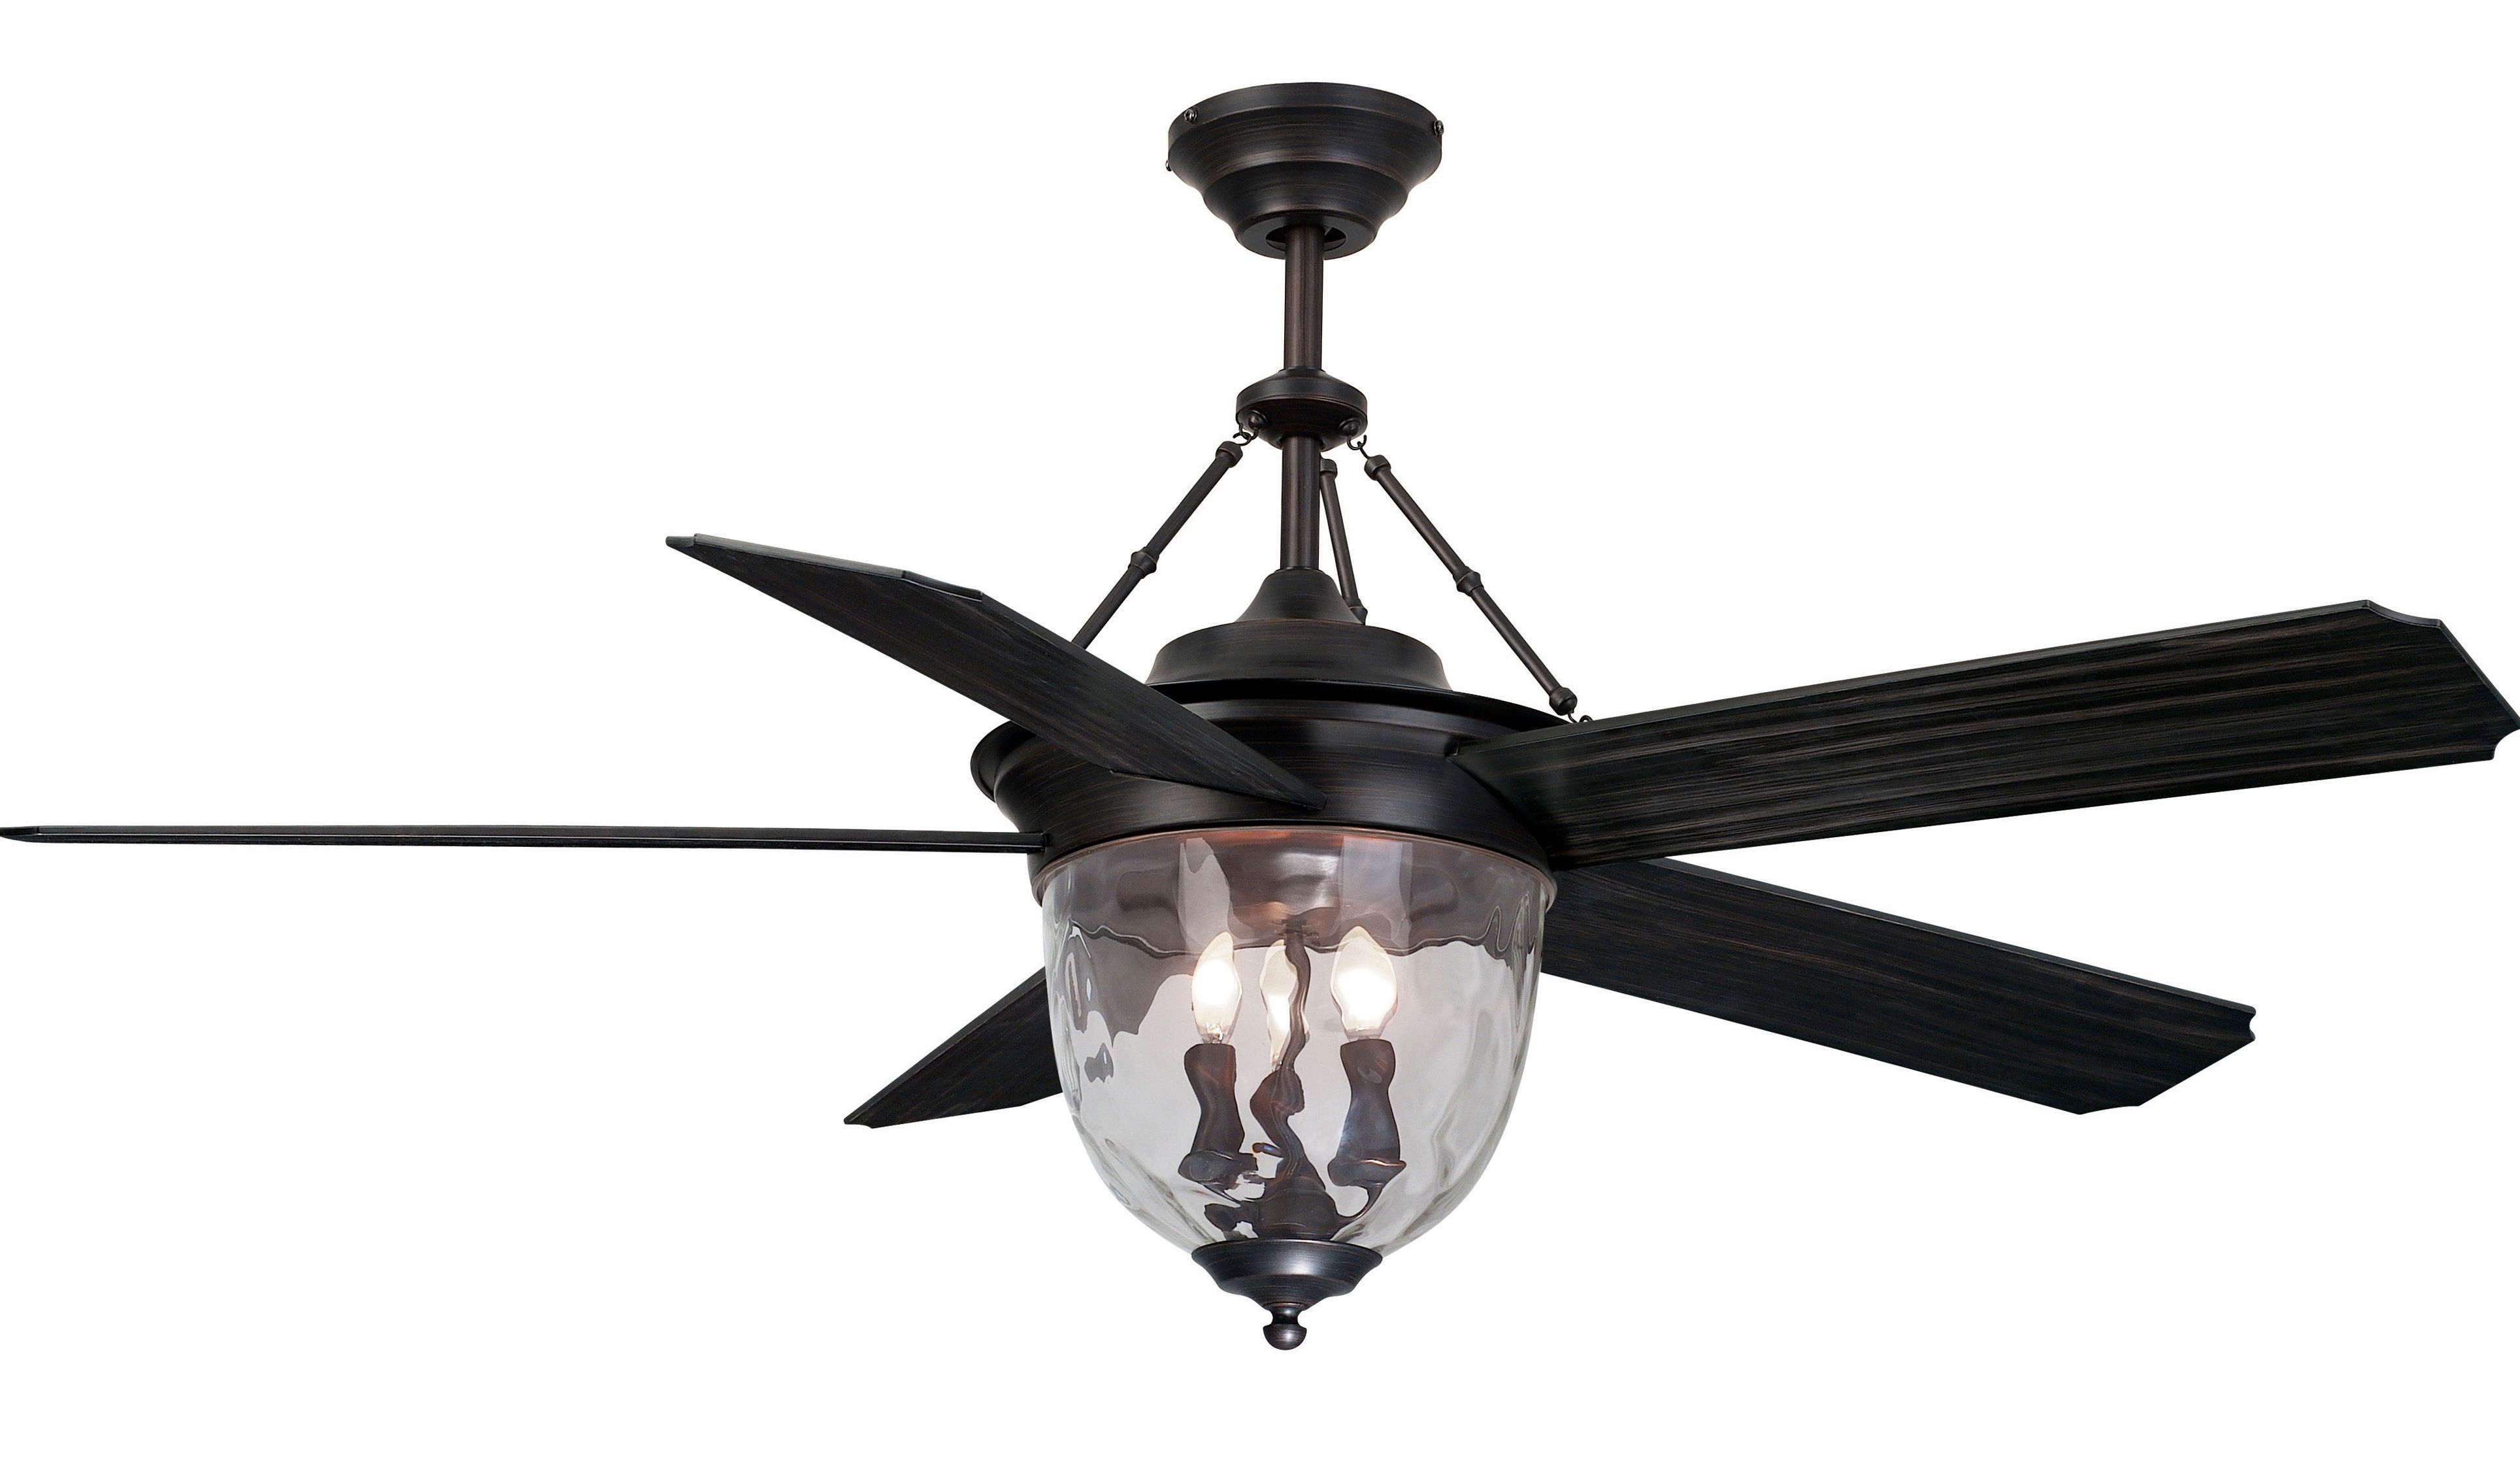 Fashionable Ceiling: Astounding Lowes Outdoor Ceiling Fans Kichler Outdoor Regarding Elegant Outdoor Ceiling Fans (View 9 of 20)